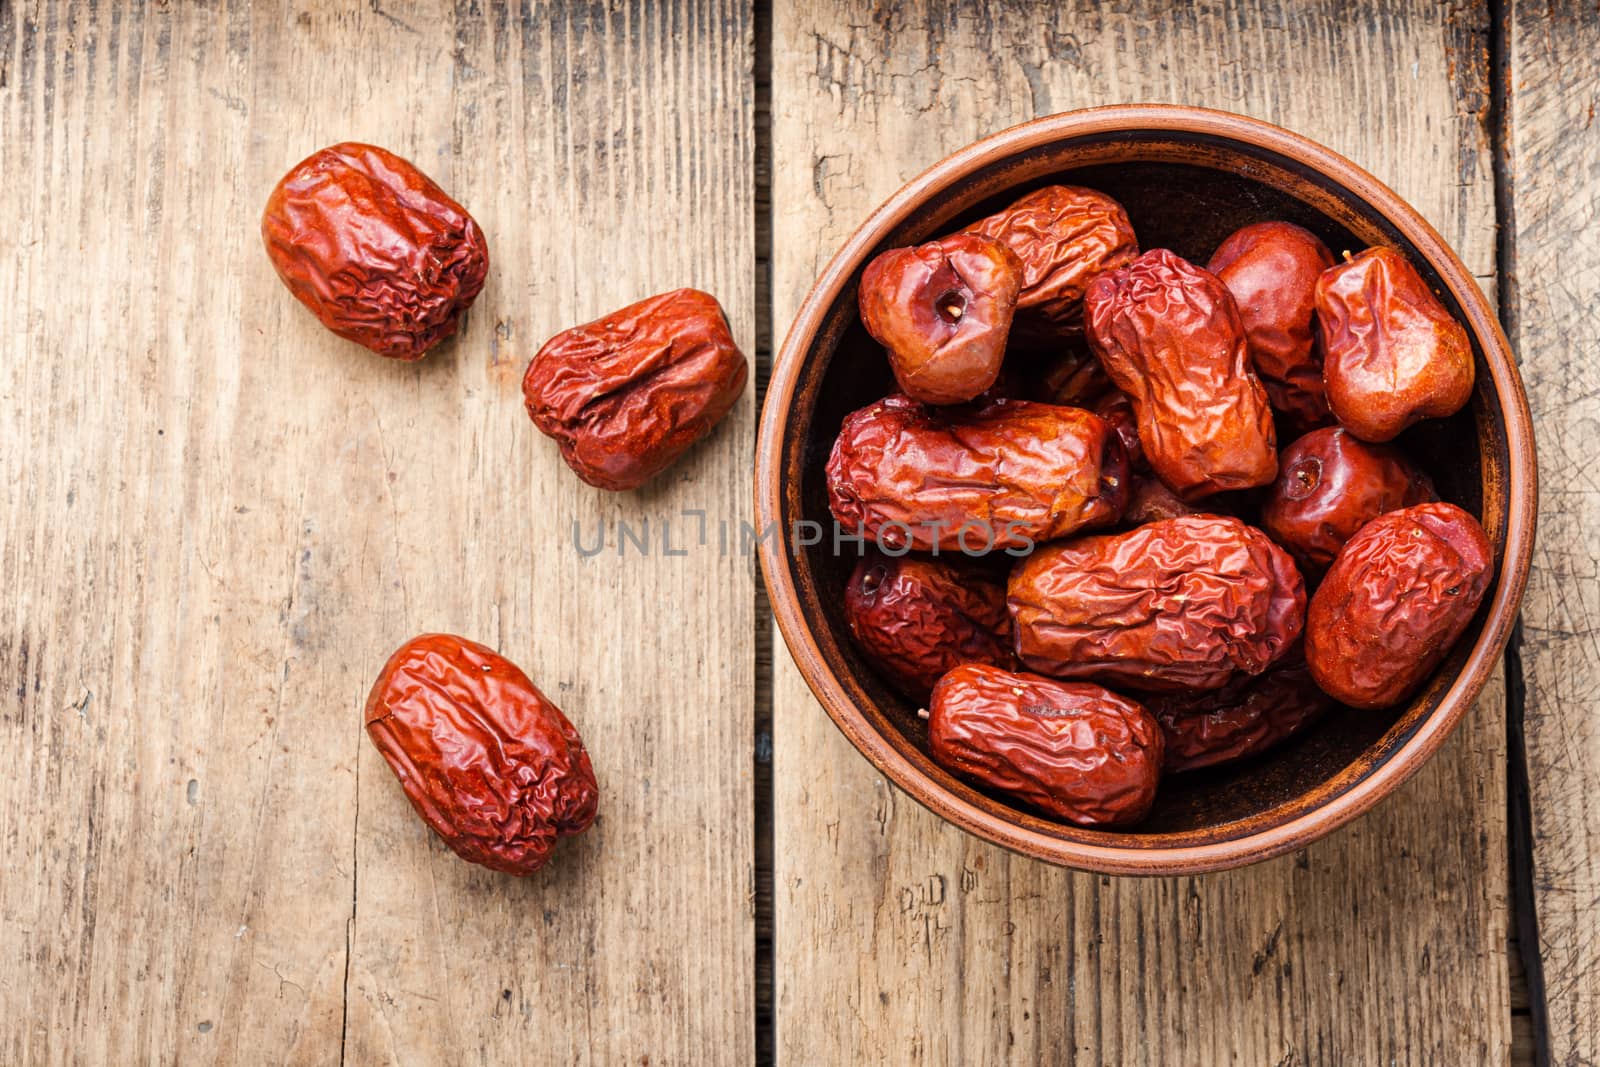 Bowl of dried unabi fruit or jujube.Space for text